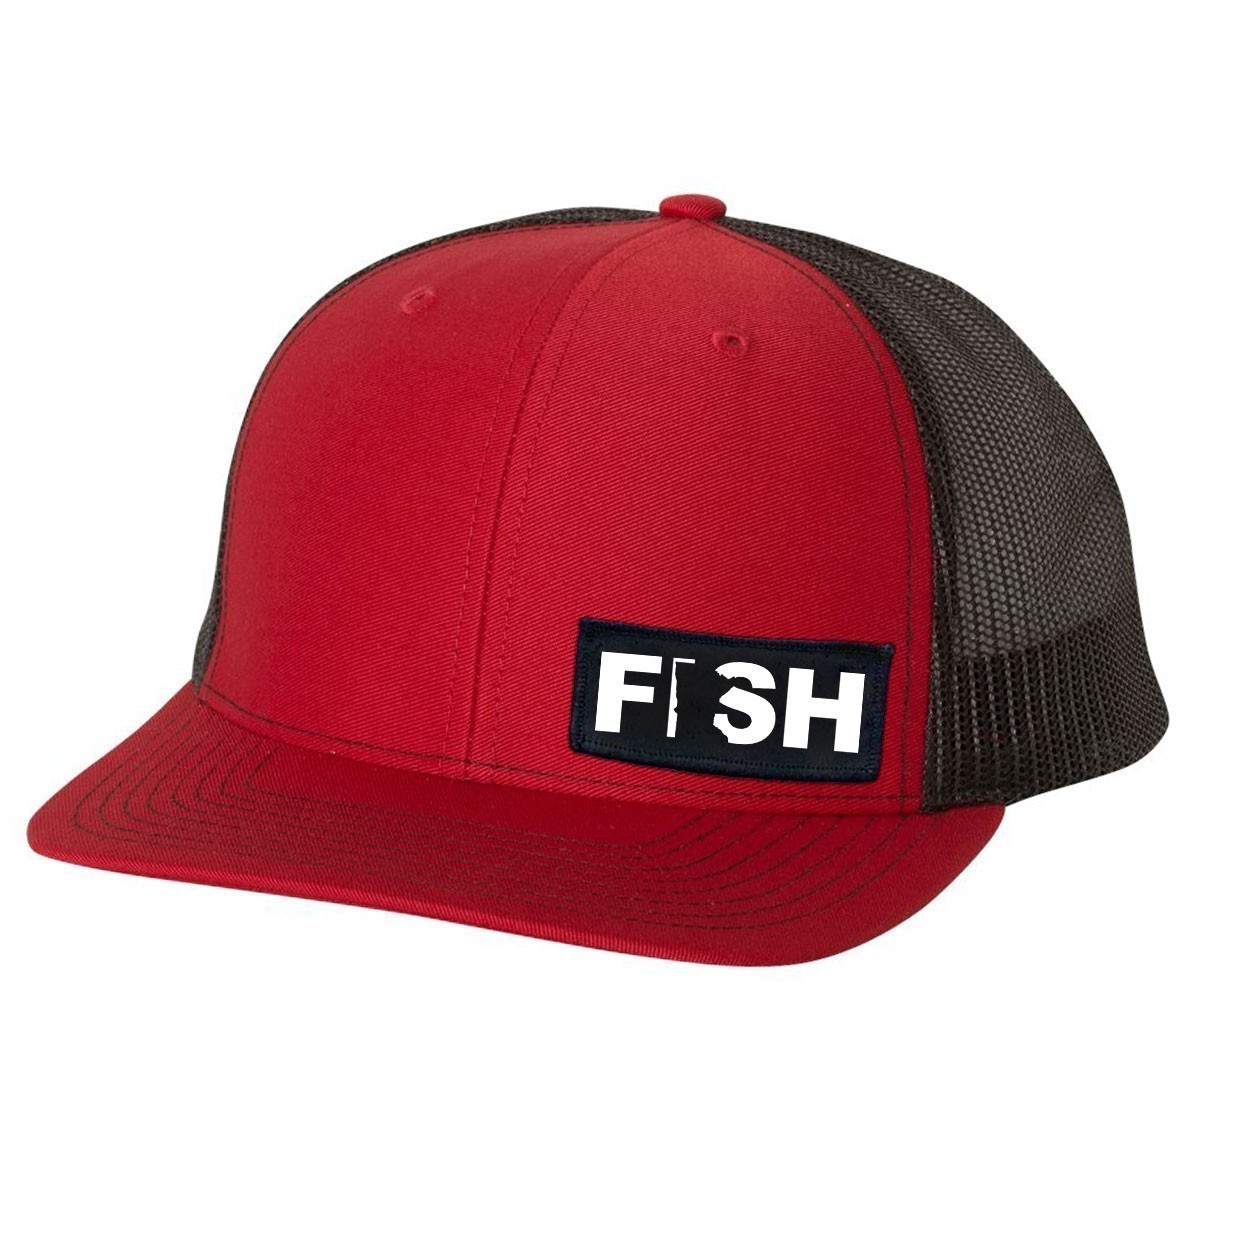 Fish Minnesota Night Out Woven Patch Snapback Trucker Hat Red/Black (White Logo)